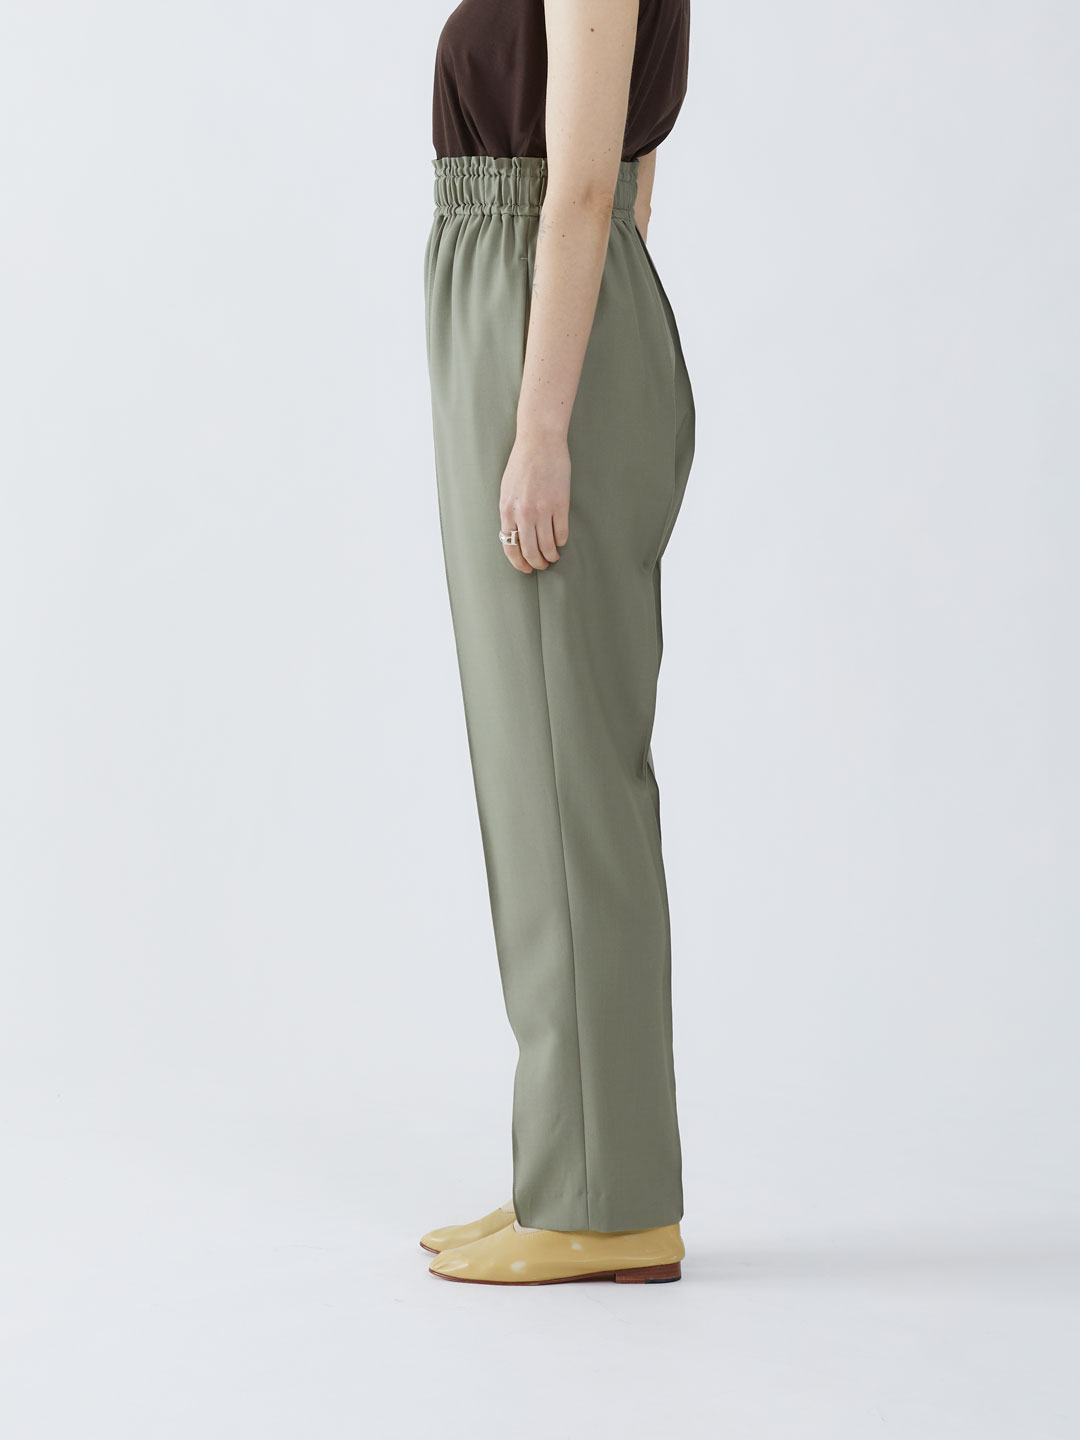 No.0144 Wool Easy Trousers - Sage